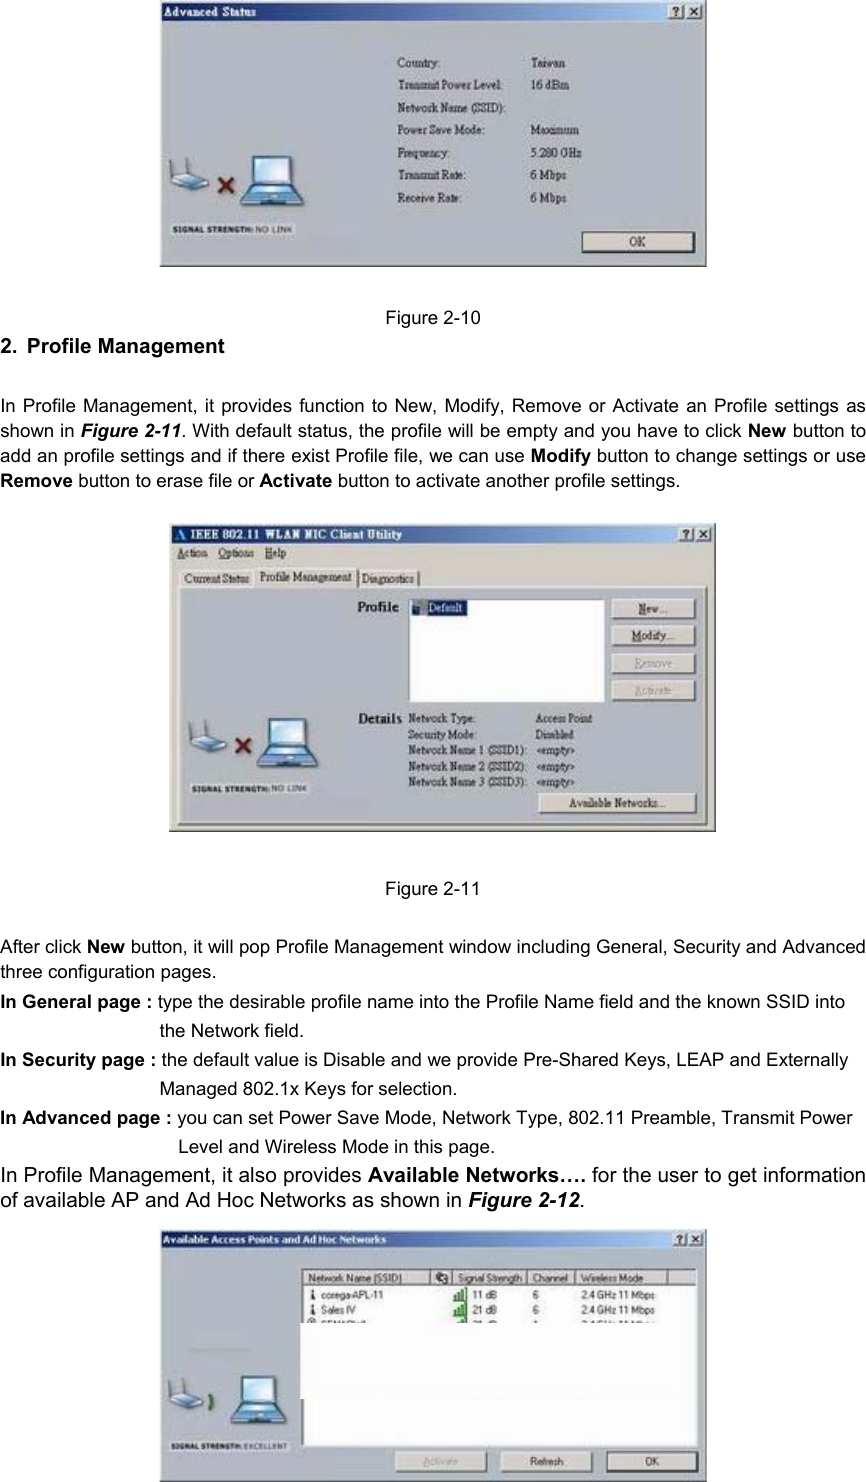 12Figure 2-102. Profile ManagementIn Profile Management, it provides function to New, Modify, Remove or Activate an Profile settings asshown in Figure 2-11. With default status, the profile will be empty and you have to click New button toadd an profile settings and if there exist Profile file, we can use Modify button to change settings or useRemove button to erase file or Activate button to activate another profile settings.Figure 2-11After click New button, it will pop Profile Management window including General, Security and Advancedthree configuration pages.In General page : type the desirable profile name into the Profile Name field and the known SSID intothe Network field.In Security page : the default value is Disable and we provide Pre-Shared Keys, LEAP and ExternallyManaged 802.1x Keys for selection.In Advanced page : you can set Power Save Mode, Network Type, 802.11 Preamble, Transmit PowerLevel and Wireless Mode in this page.In Profile Management, it also provides Available Networks…. for the user to get informationof available AP and Ad Hoc Networks as shown in Figure 2-12.